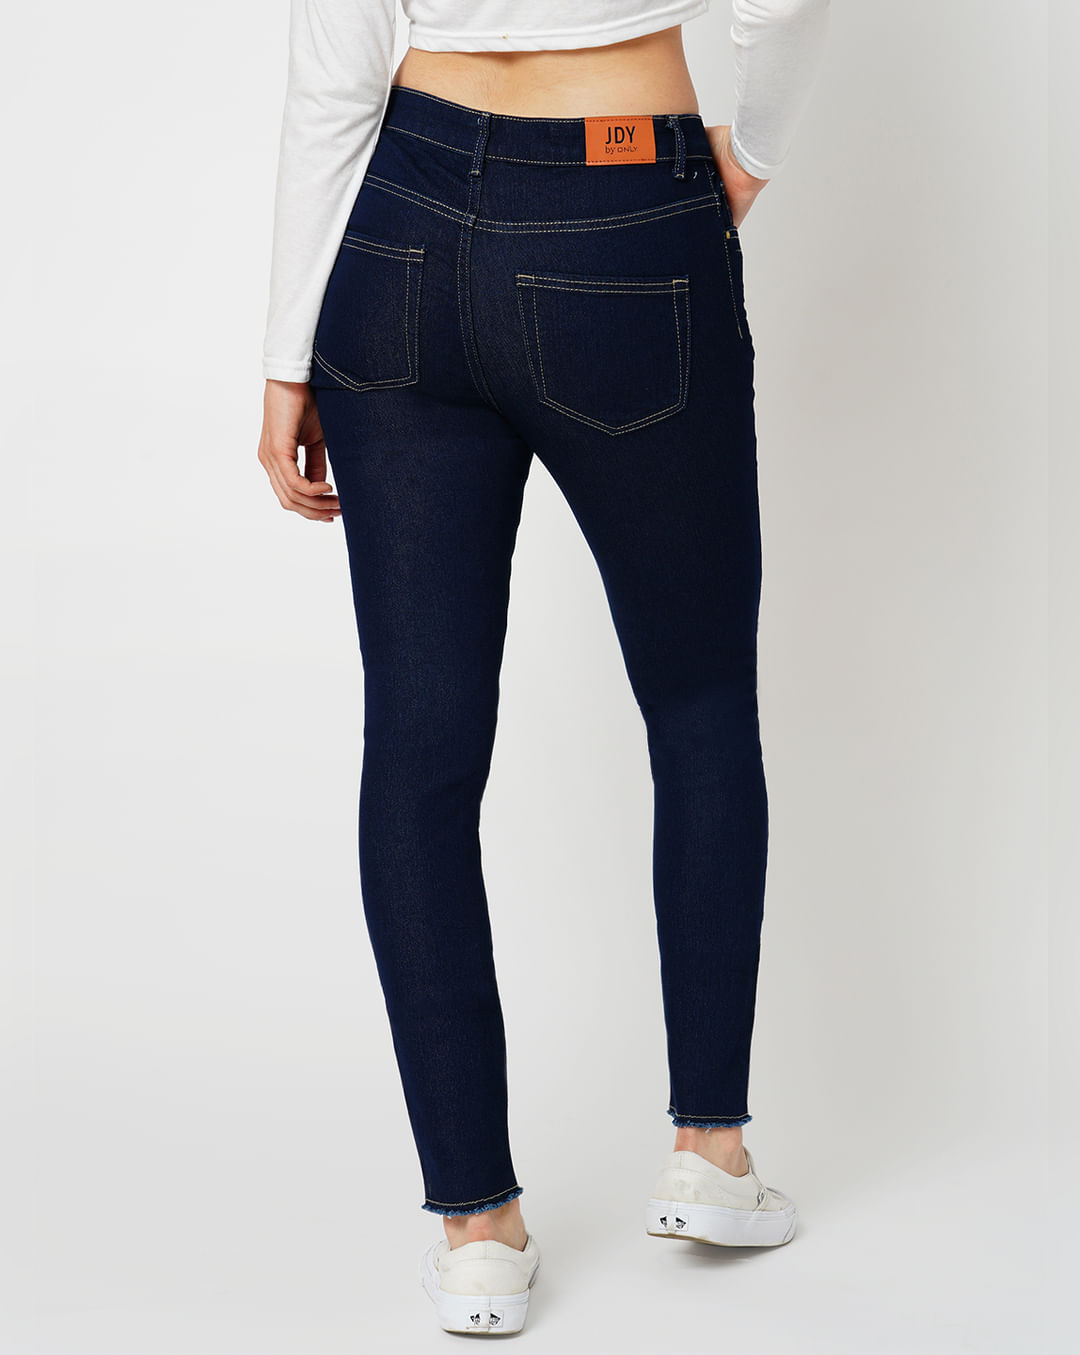 JDY by ONLY Dark Blue Mid Rise Skinny Jeans